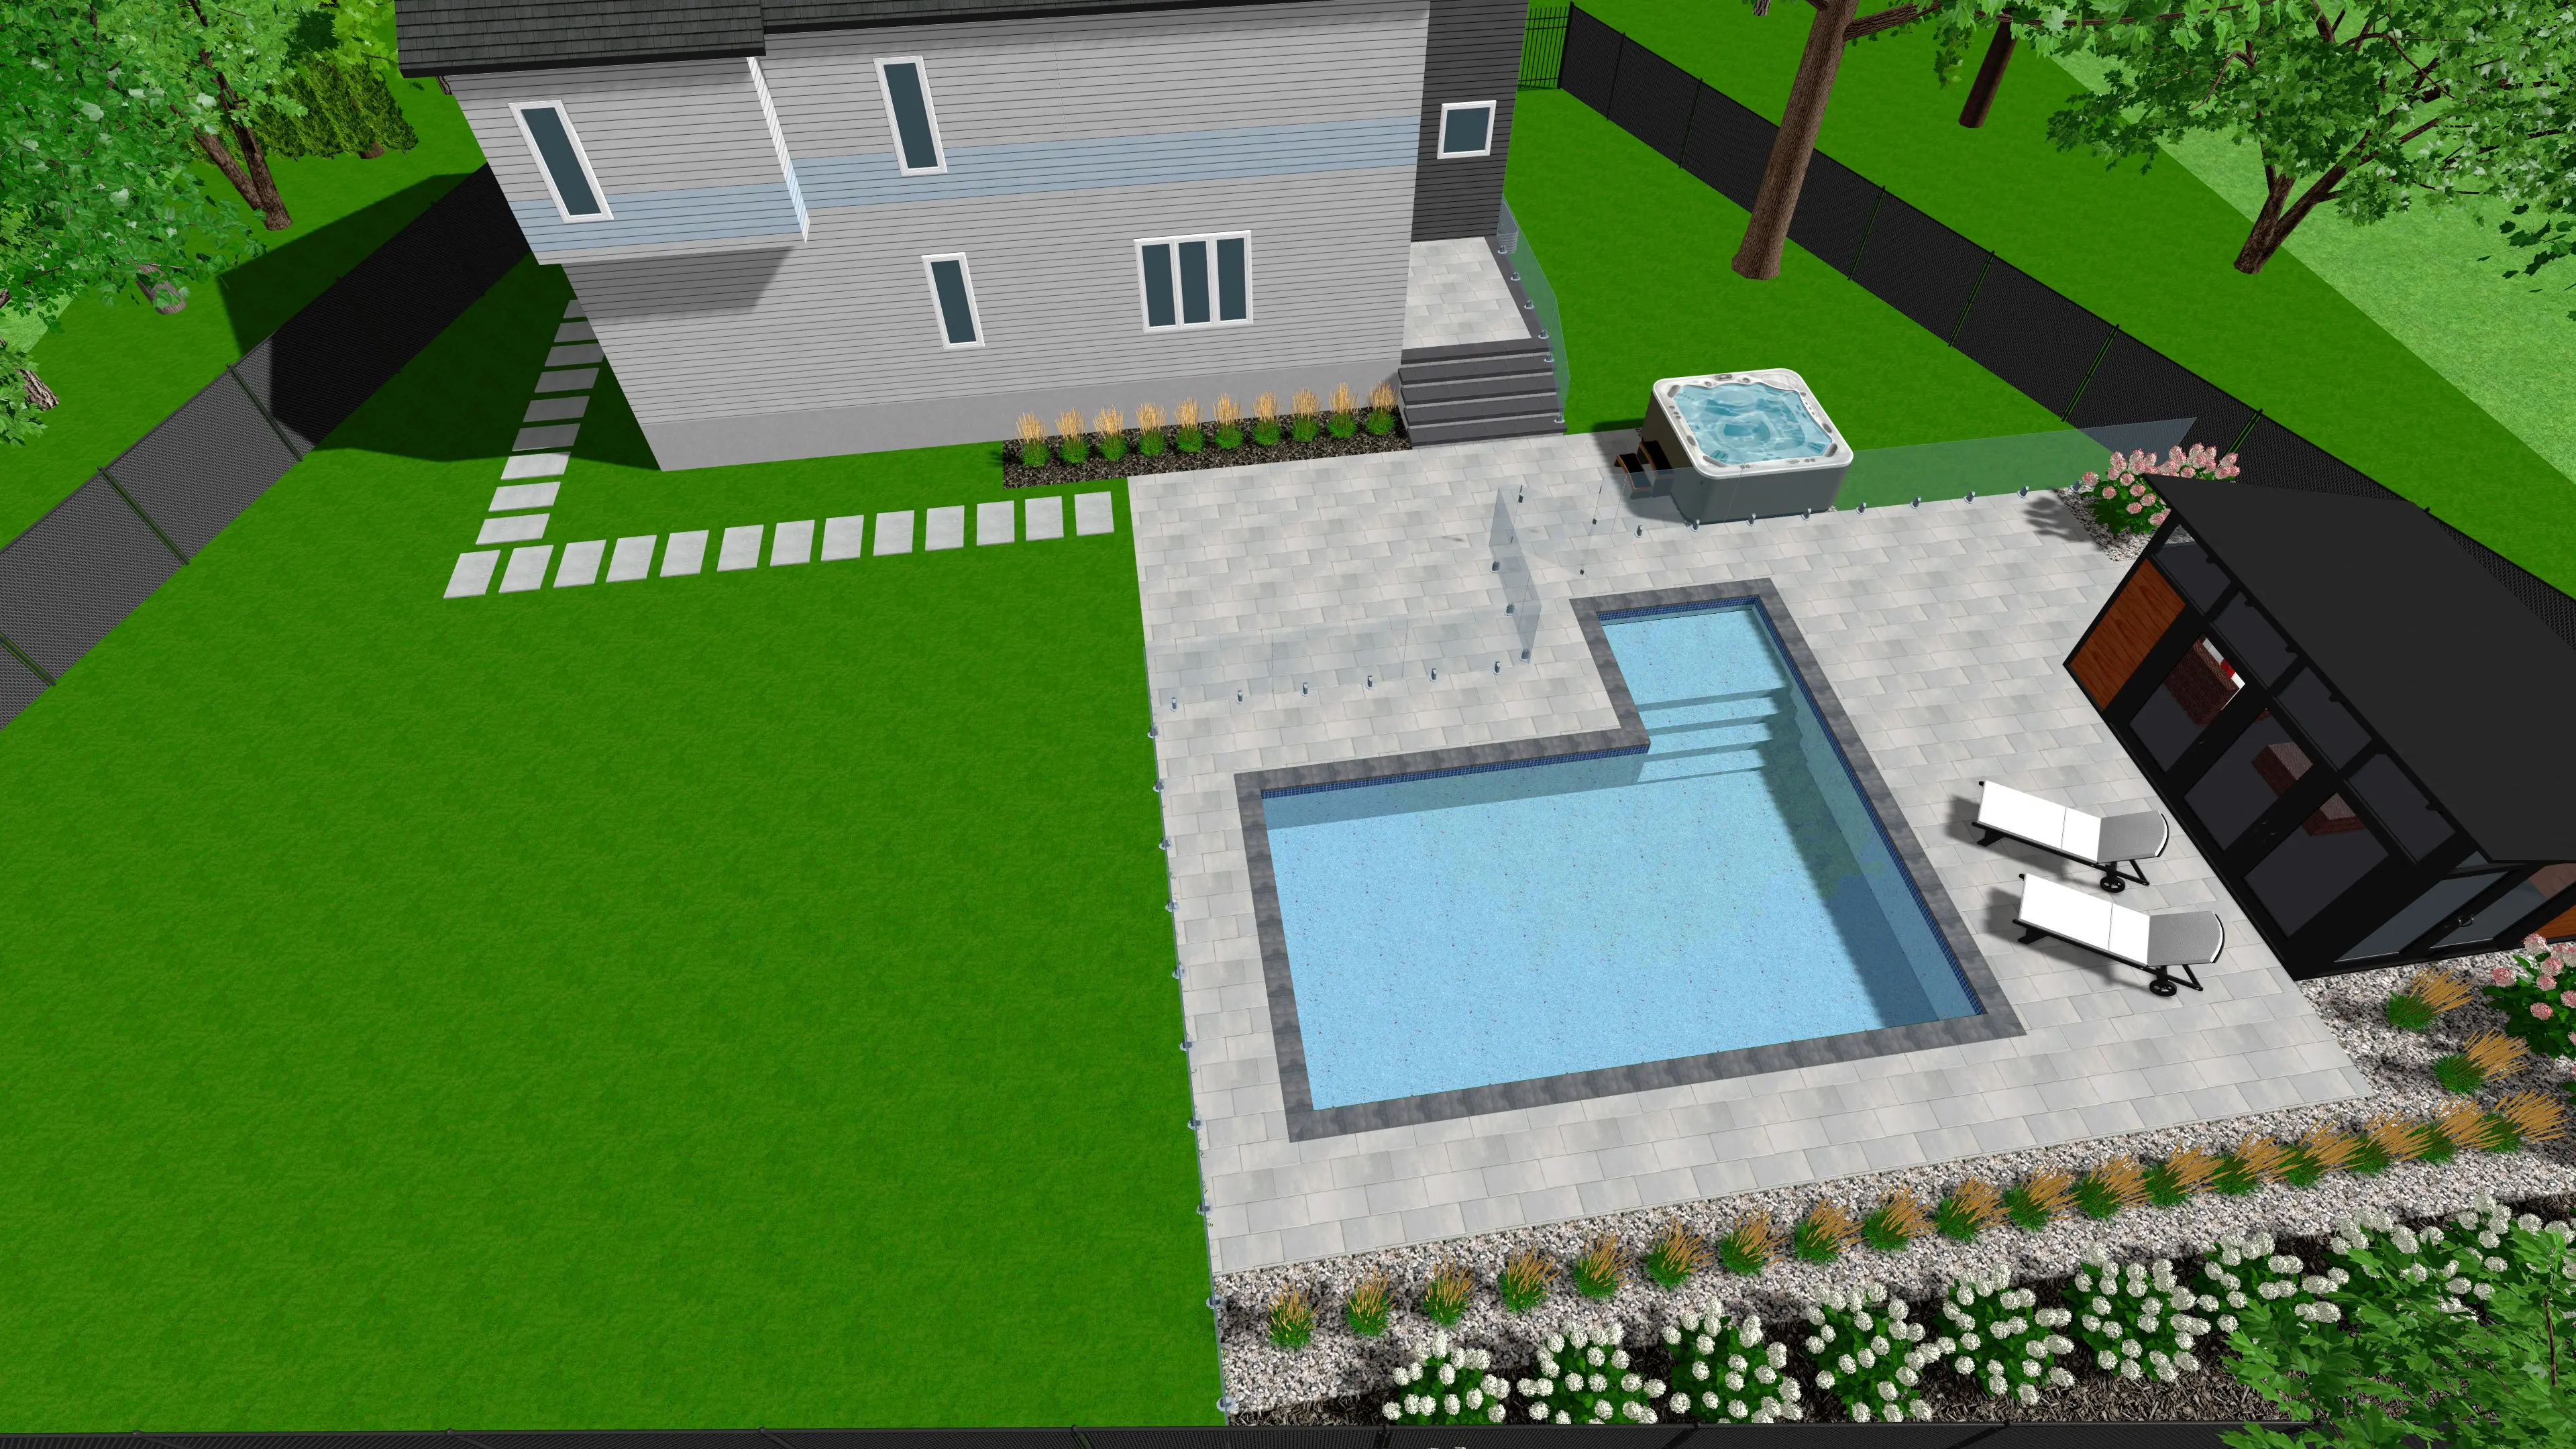 design and location of a backyard spa